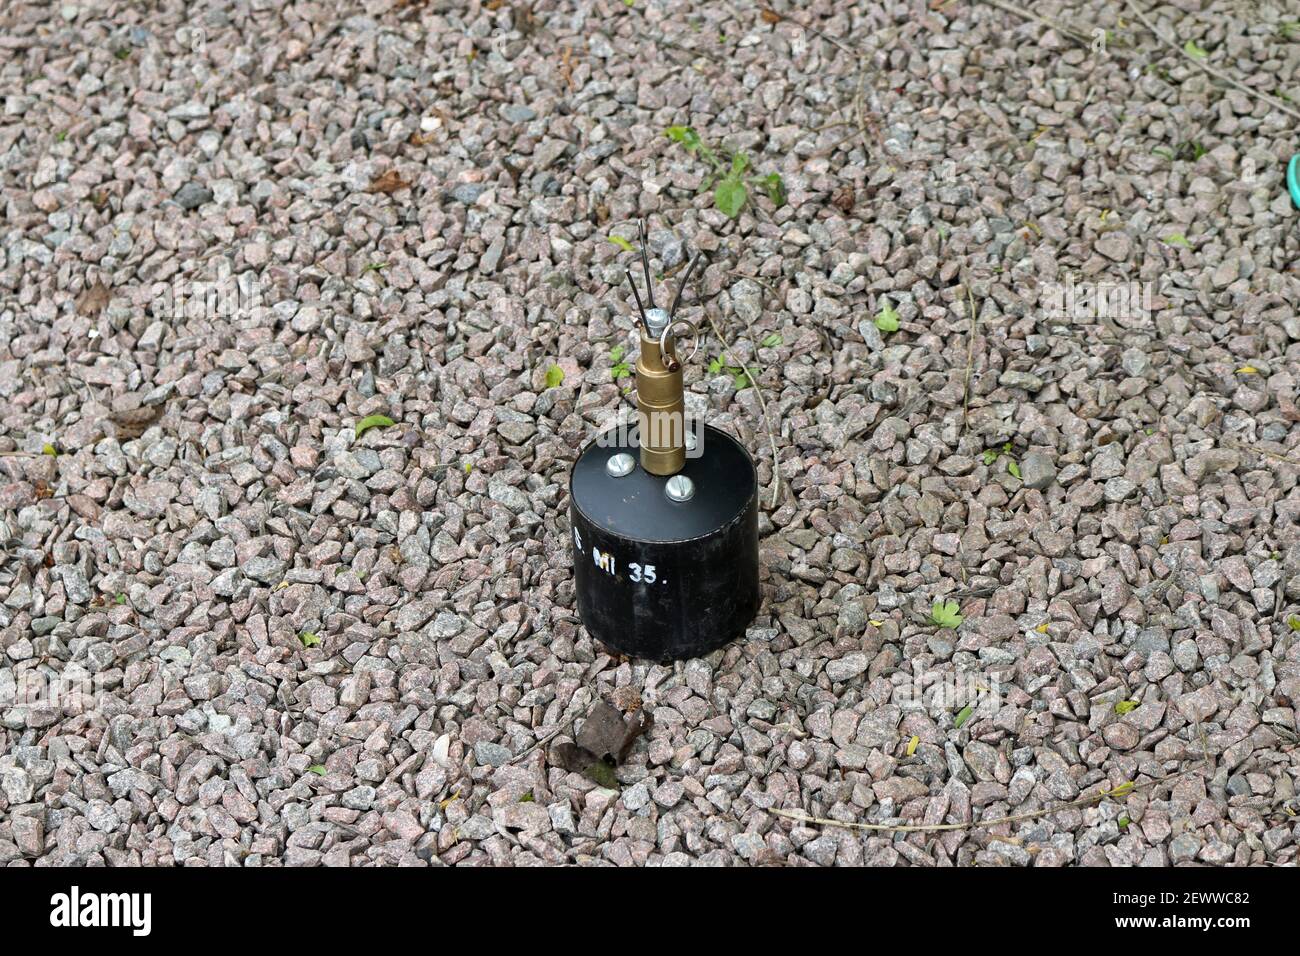 German world war two S MI 35 anti personnel mine, or bouncing betty at a historic reenactment event on a background of gravel chips. Stock Photo